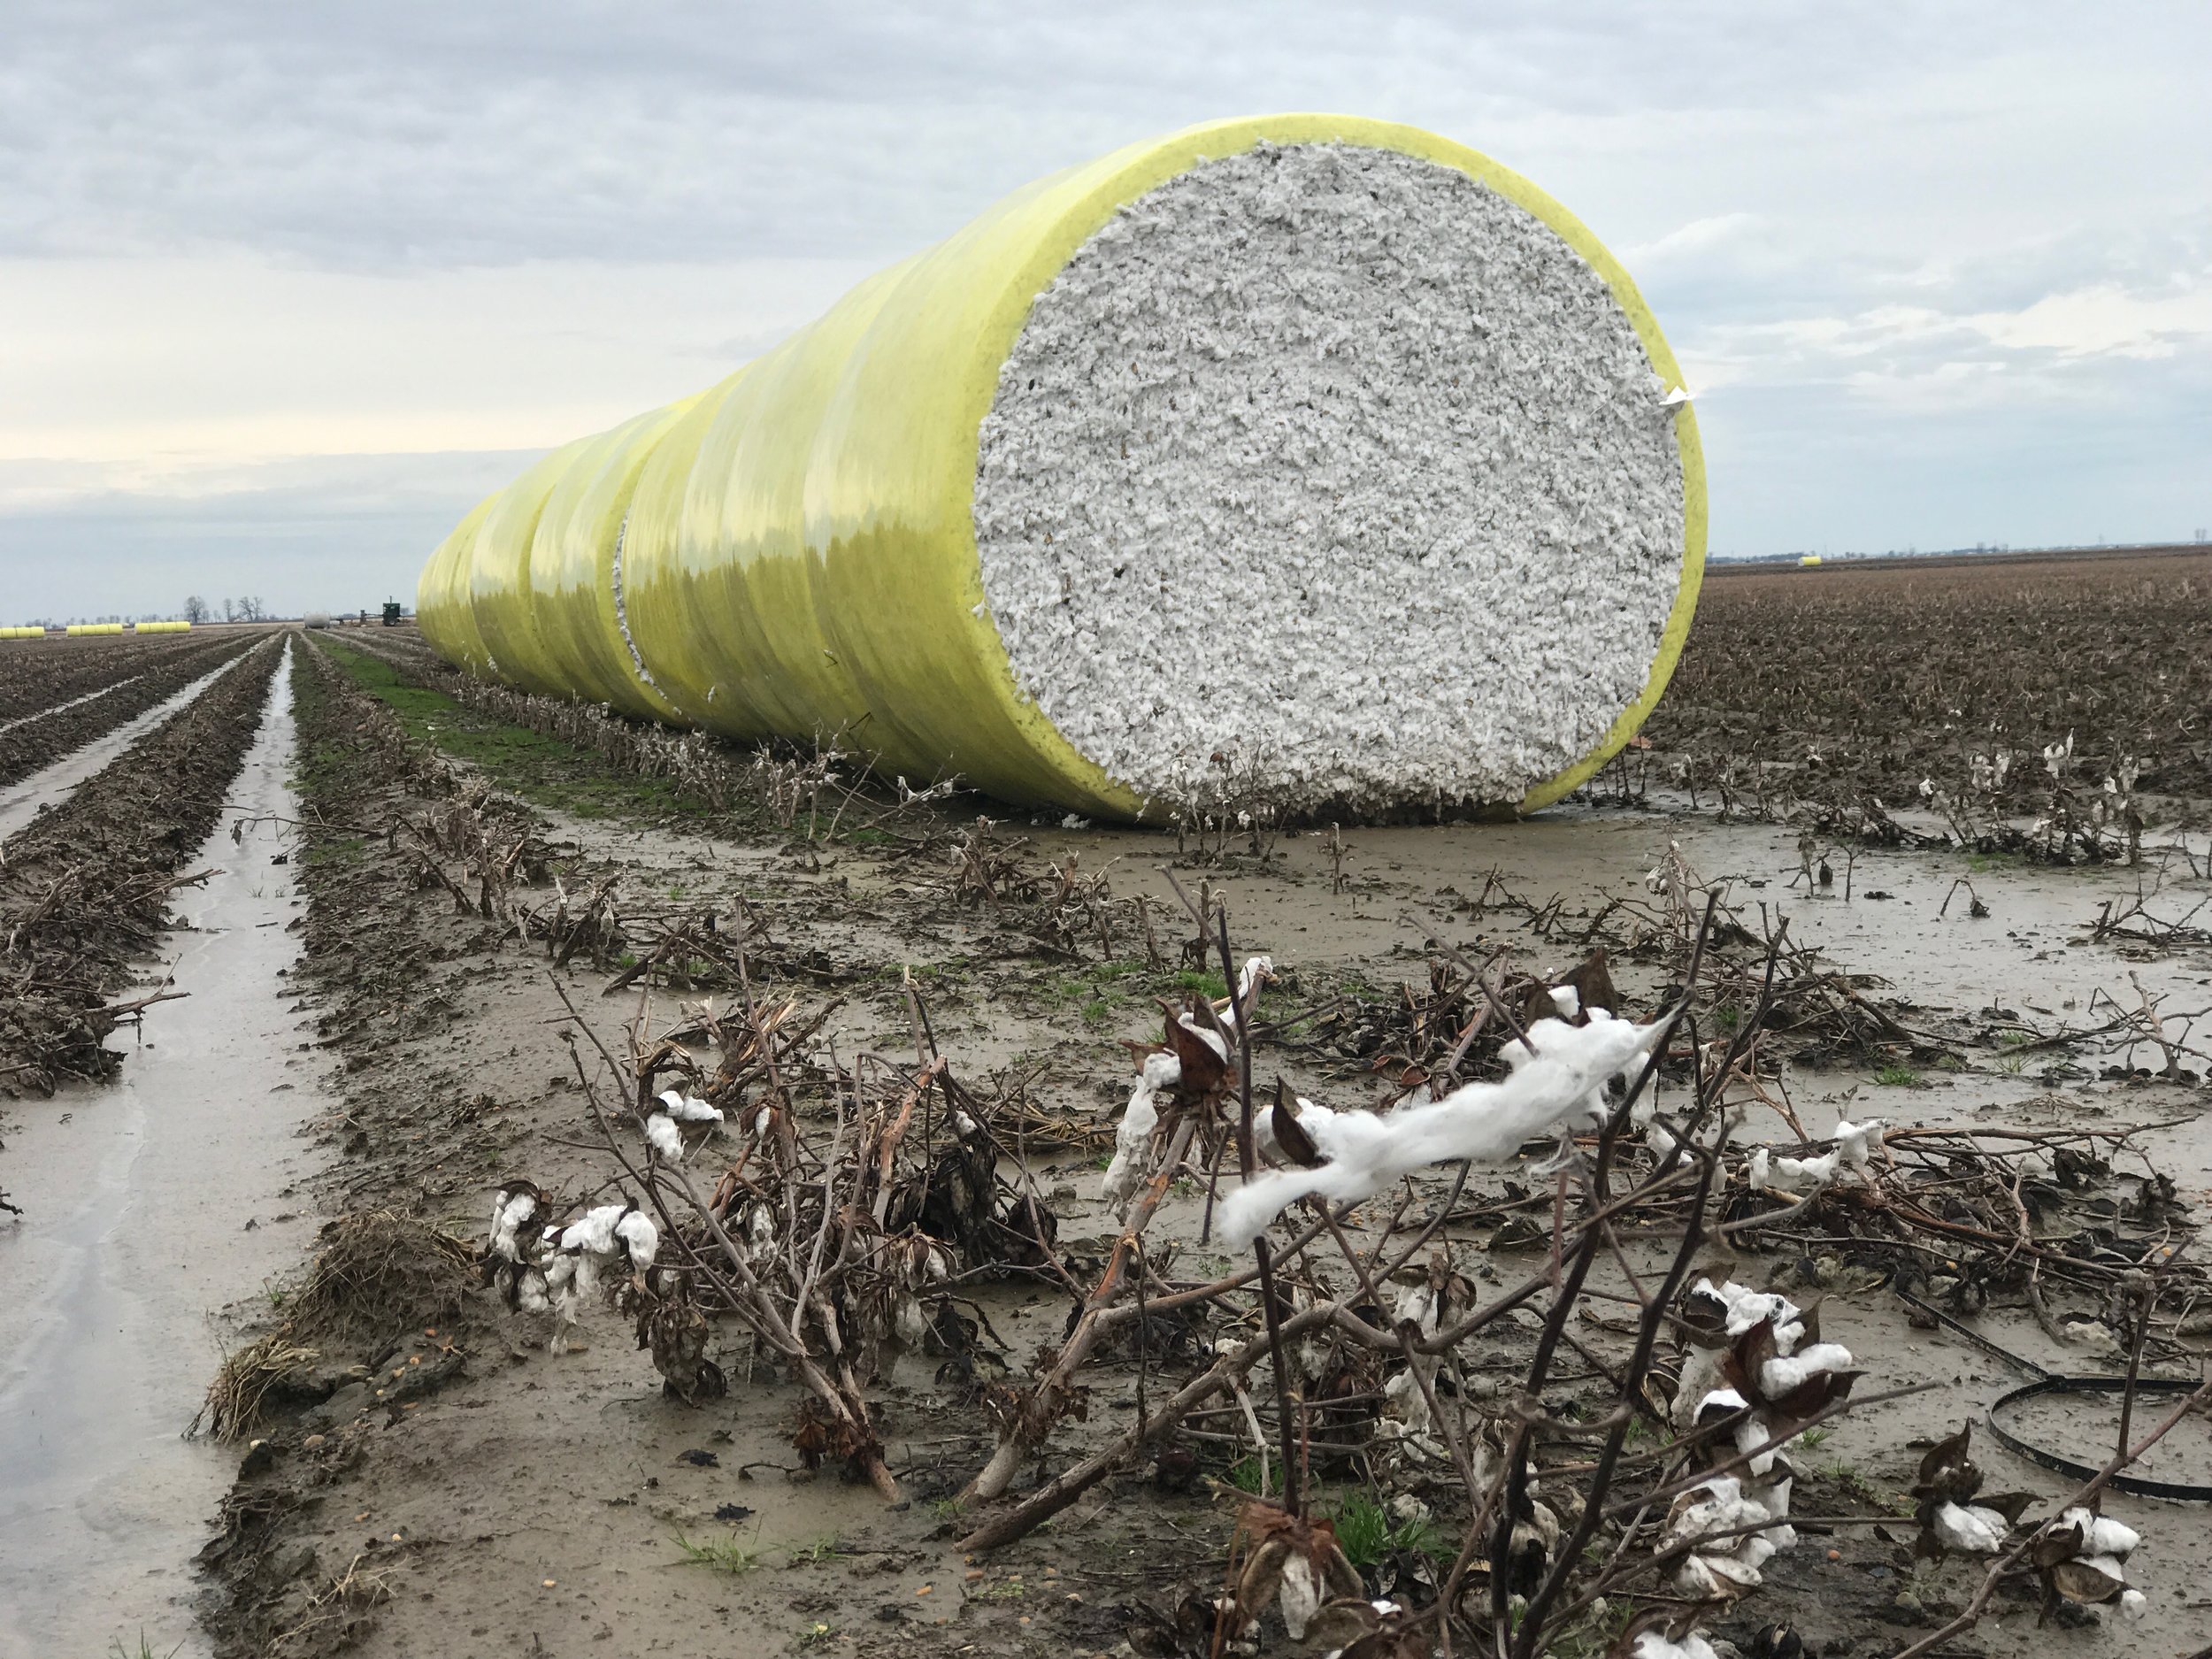  A module of cotton, produced largely without the help of human hands, waits at the edge of a cotton field in Wilson, Ark.      